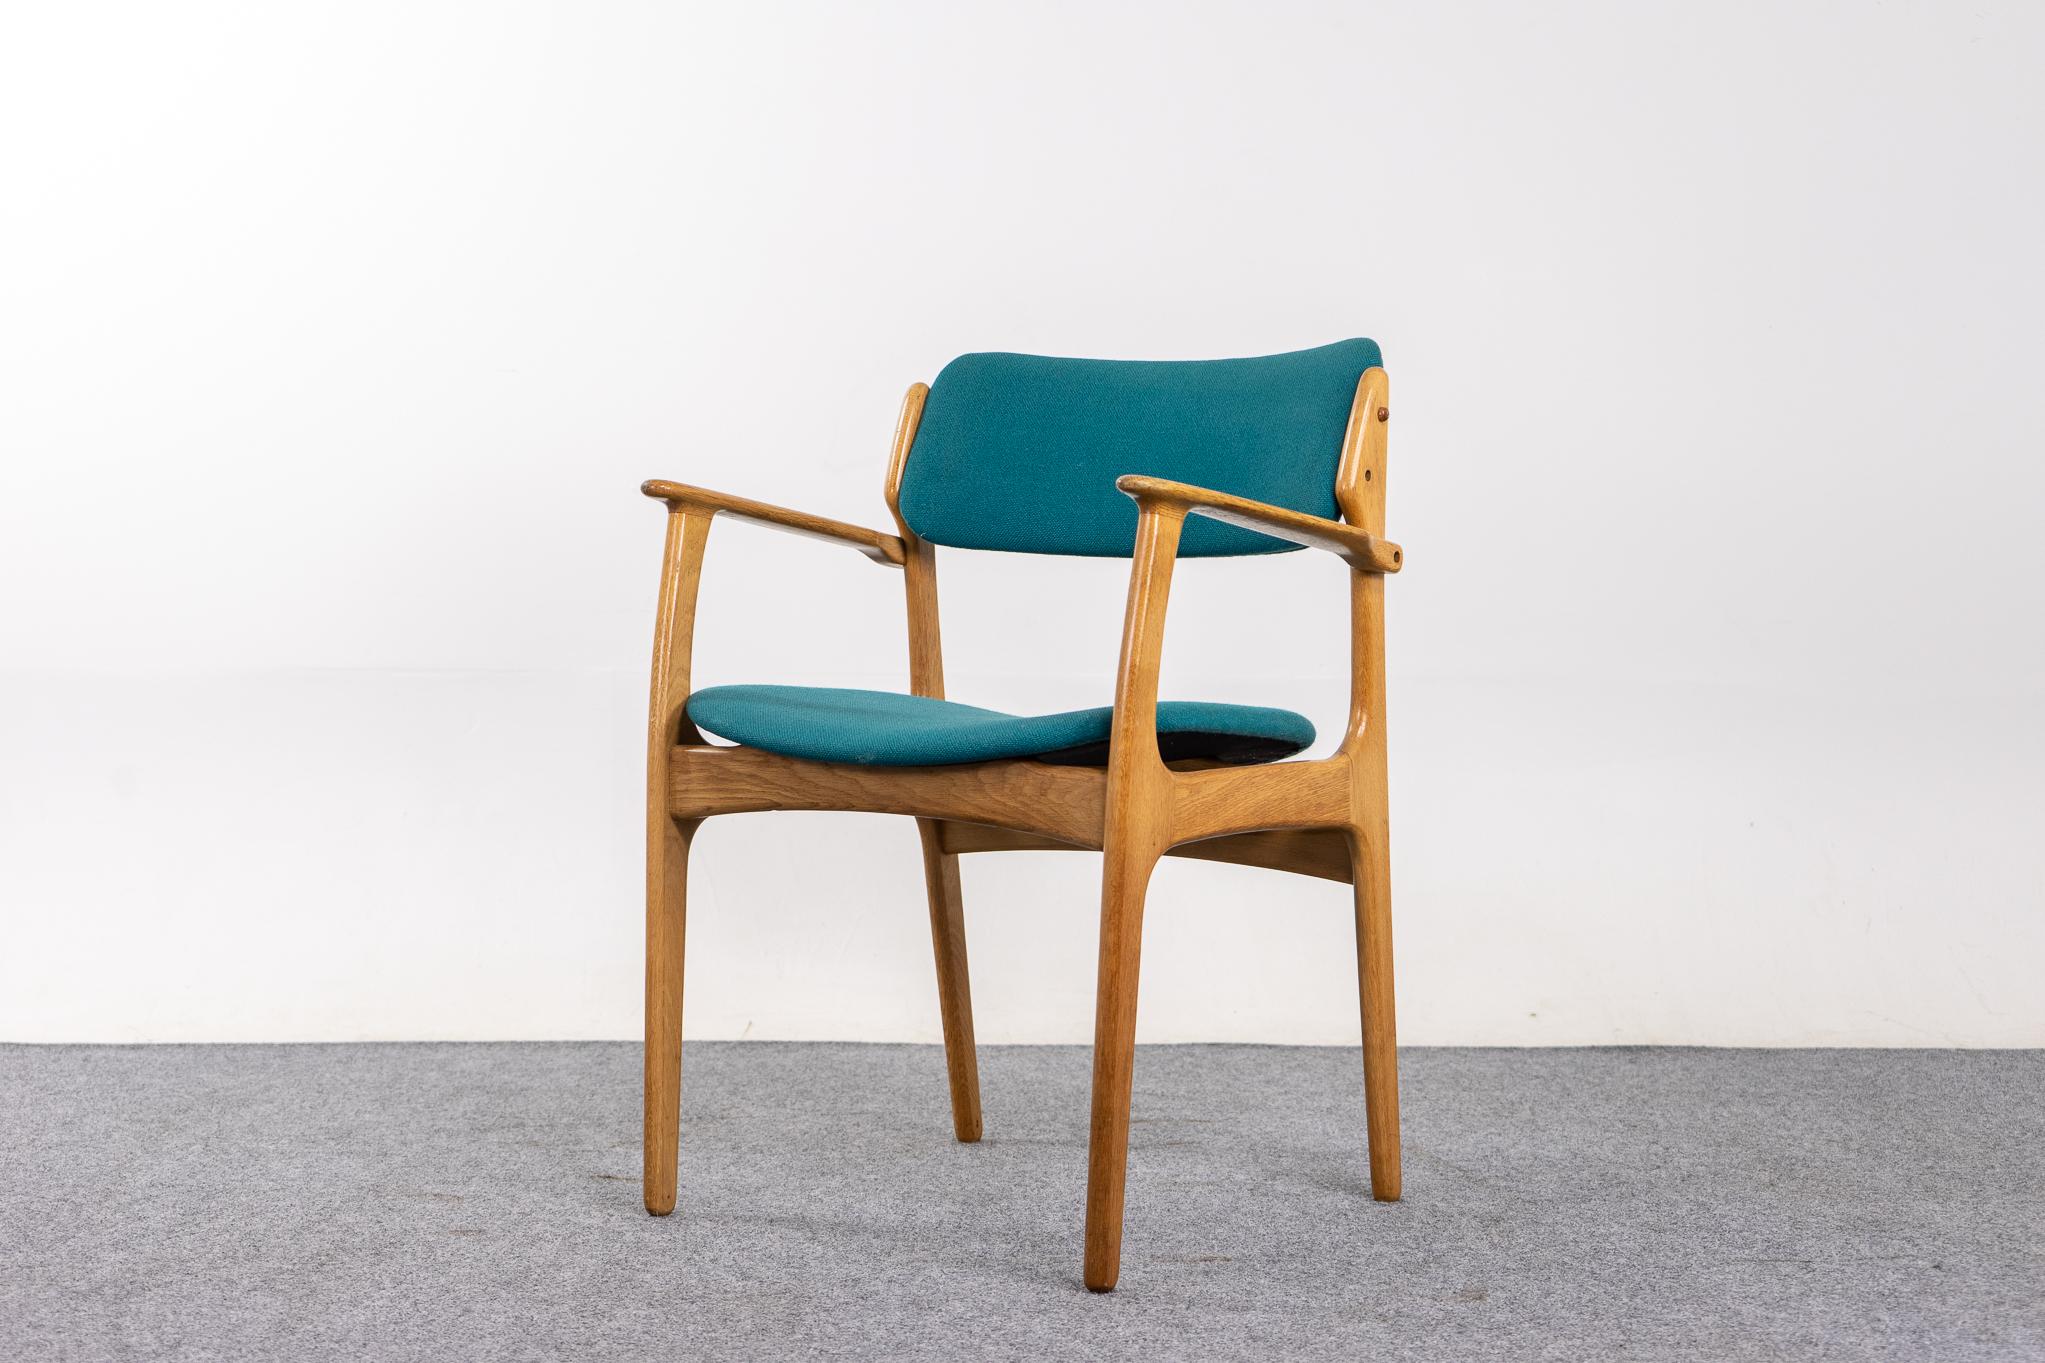 Oak model 50 armchair by Erik Buch, circa 1960's. Sturdy solid oak frame is wonderfully scaled for your many seating needs around the urban home. Elegant frame with floating bottom design. Danish Furniture Makers' control stamp intact.

Unrestored